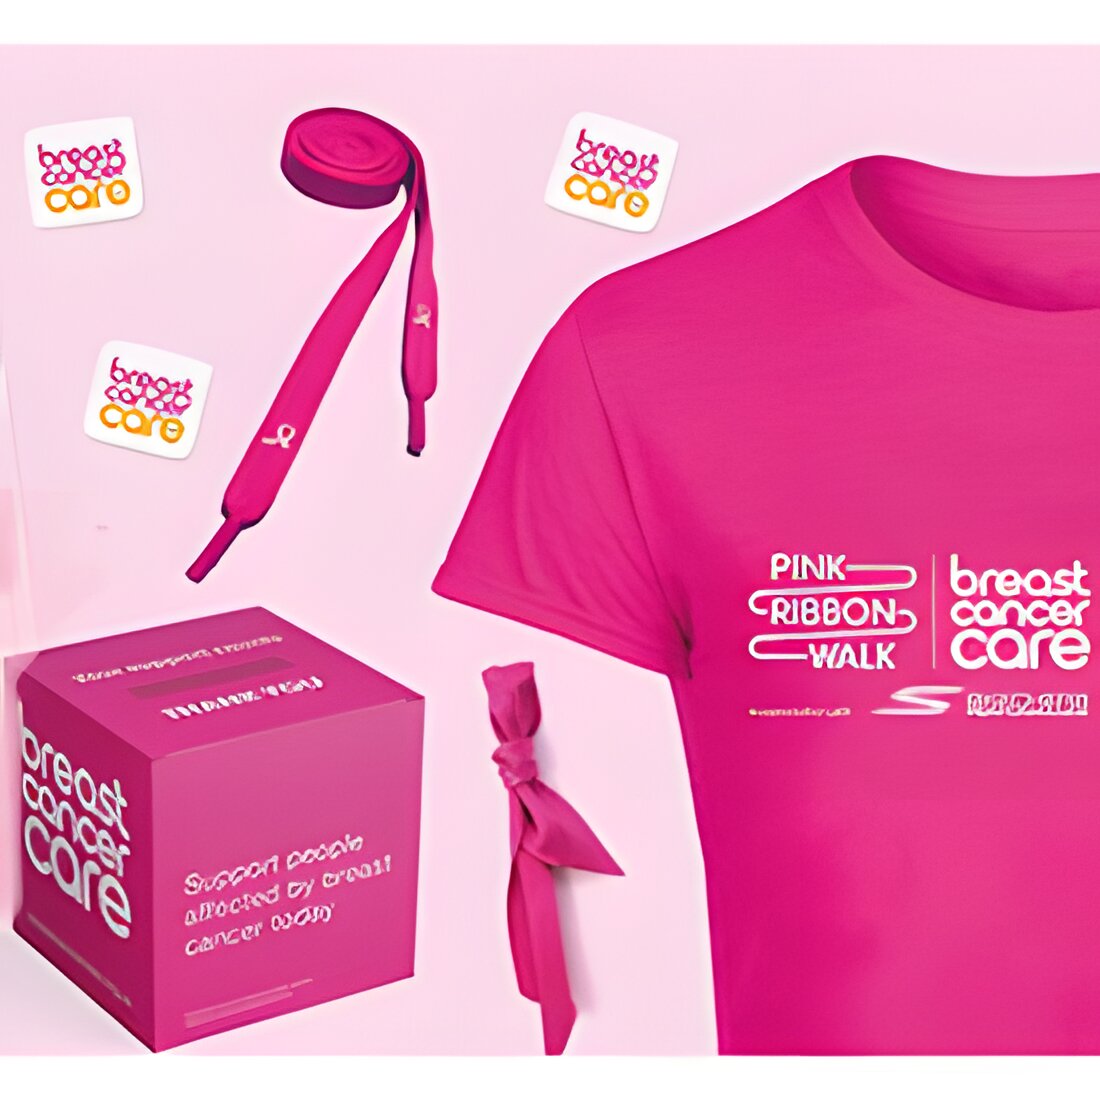 Free Breast Cancer Now T-shirt